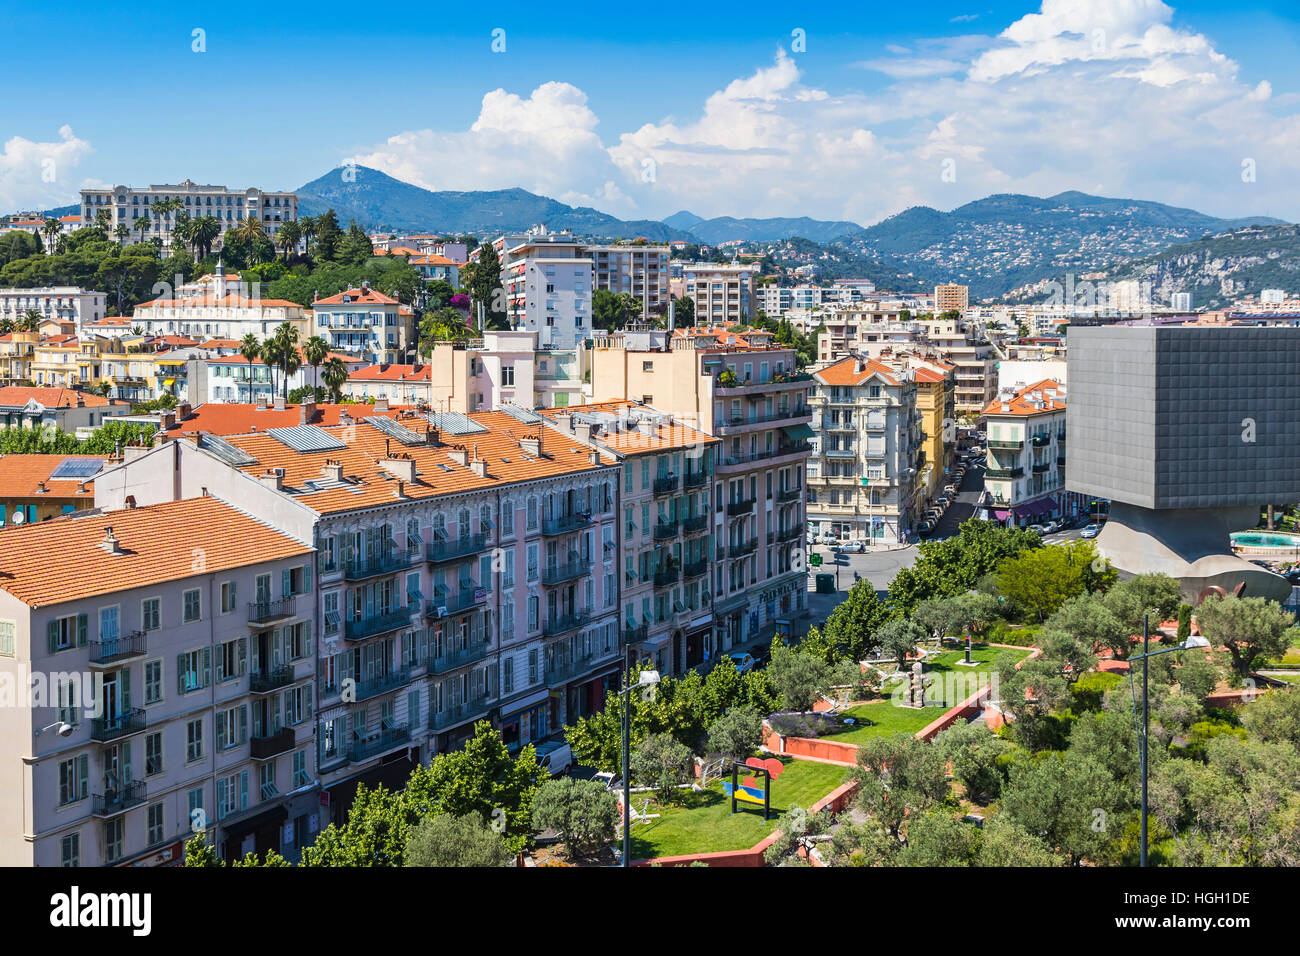 Aerial view of colorful historical houses in City of Nice. Nice - luxury resort of French Riviera, France Stock Photo